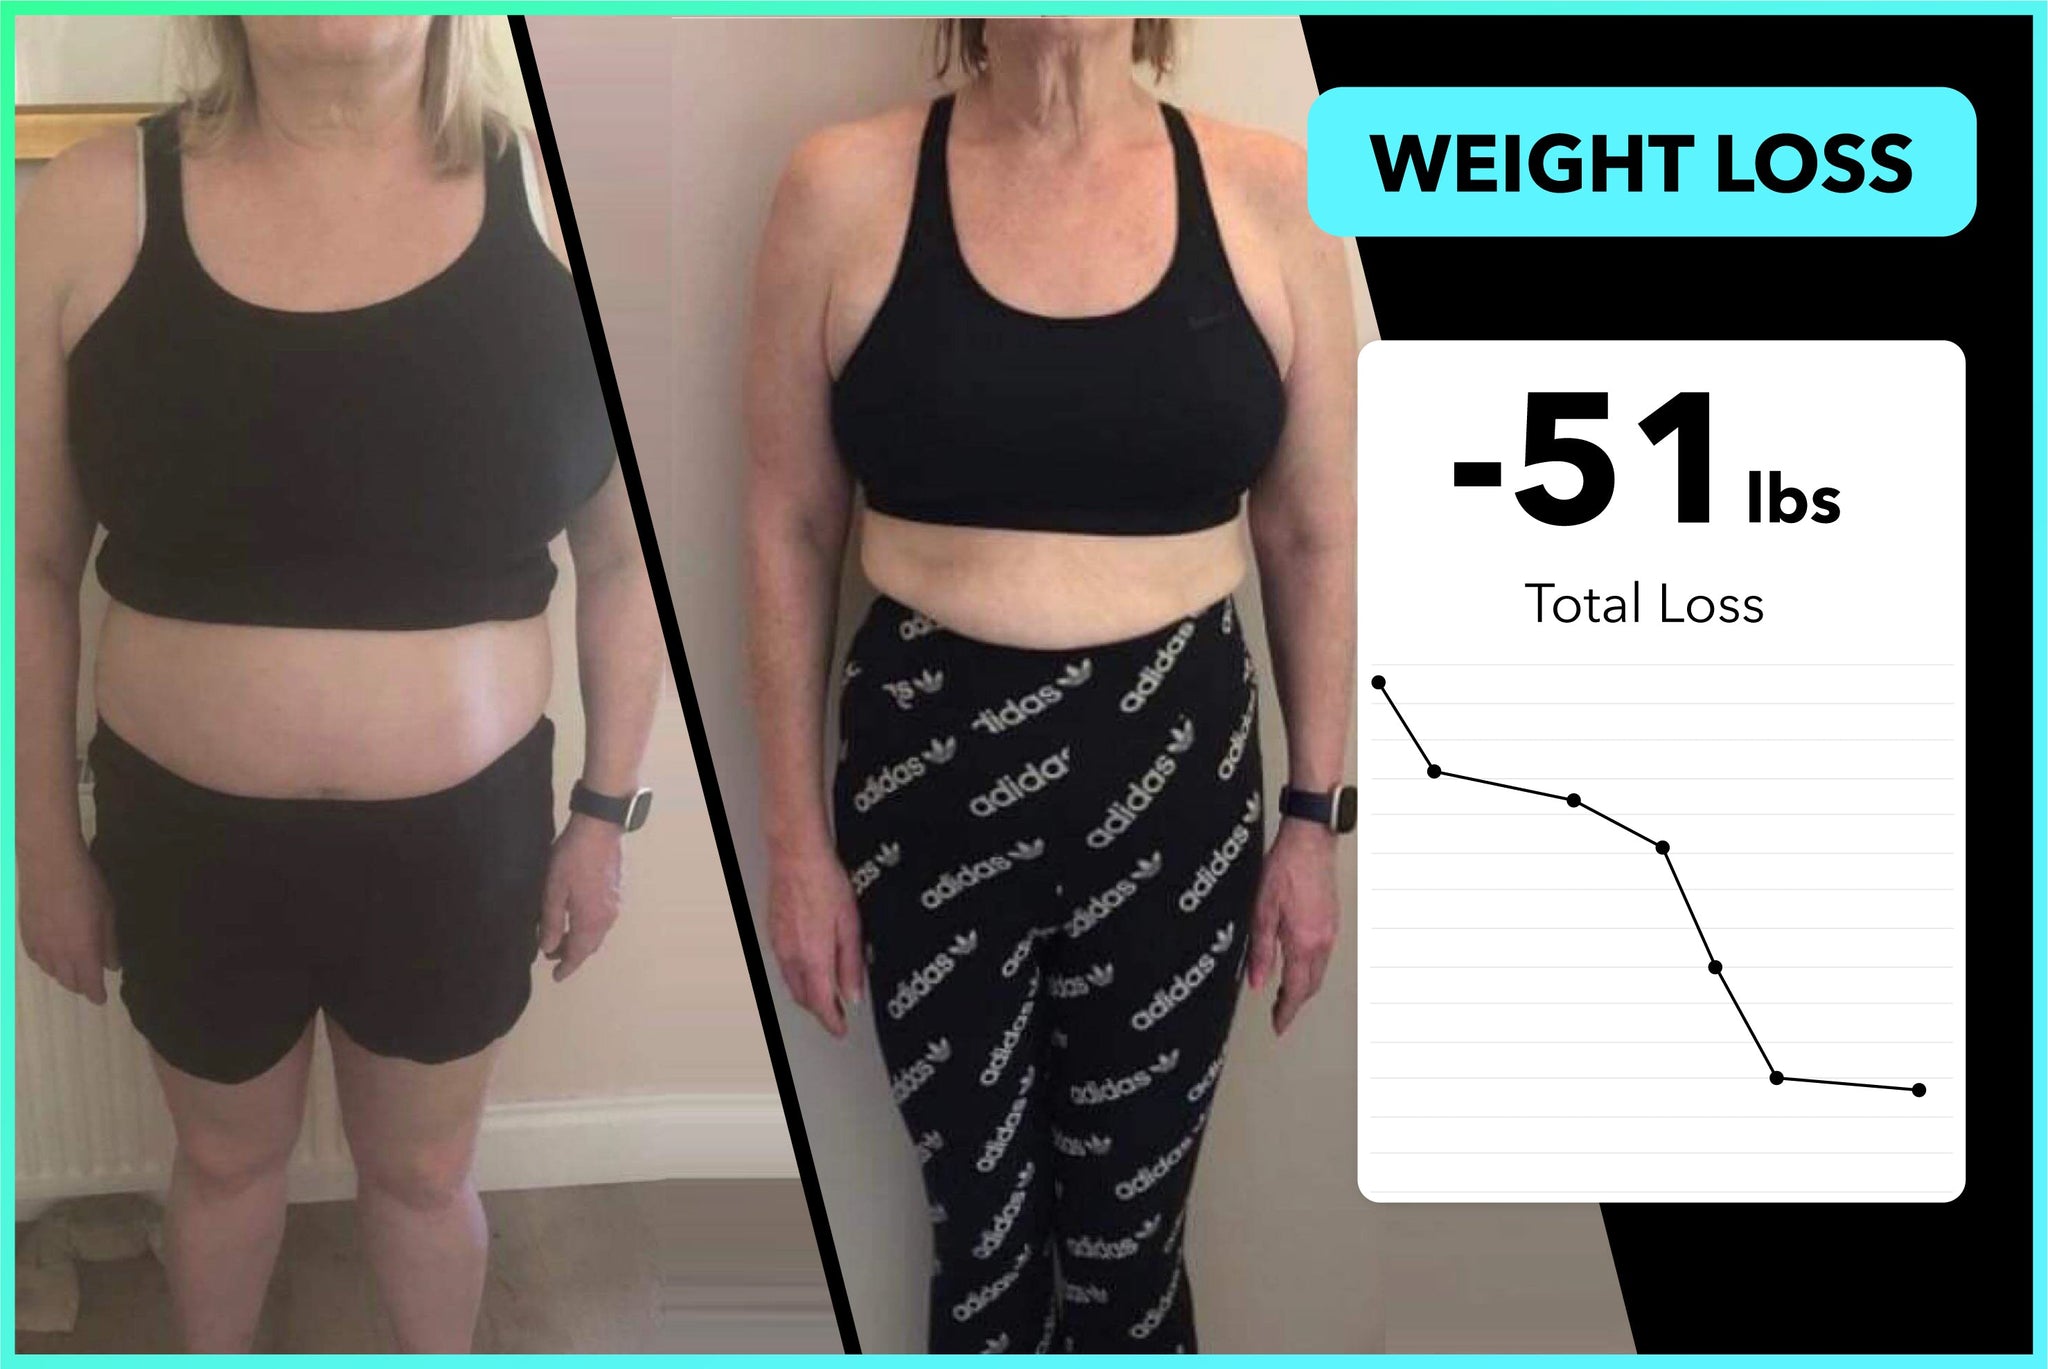 This is how Mary lost 61lbs with Team RH